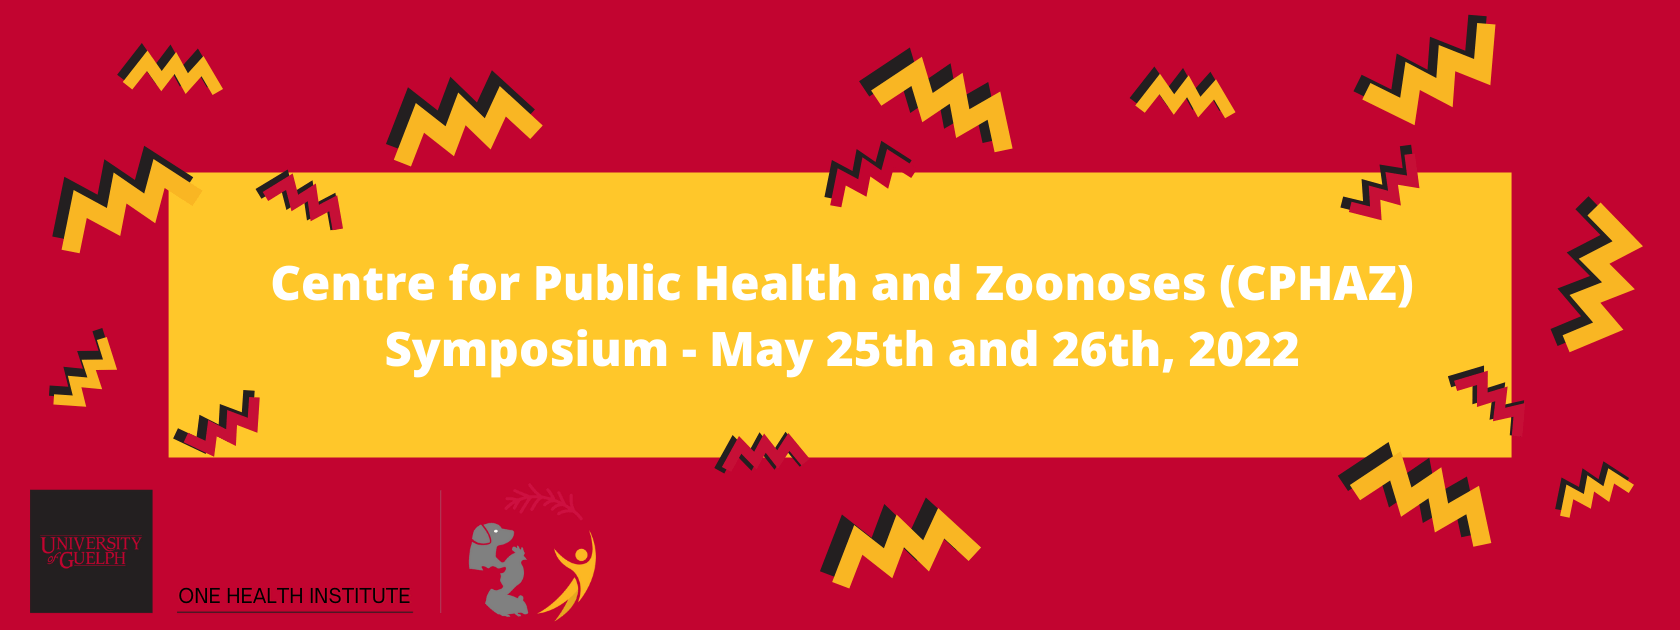 A red and yellow banner promoting the Centre for Public Health and Zoonoses Symposium, May 25-26.